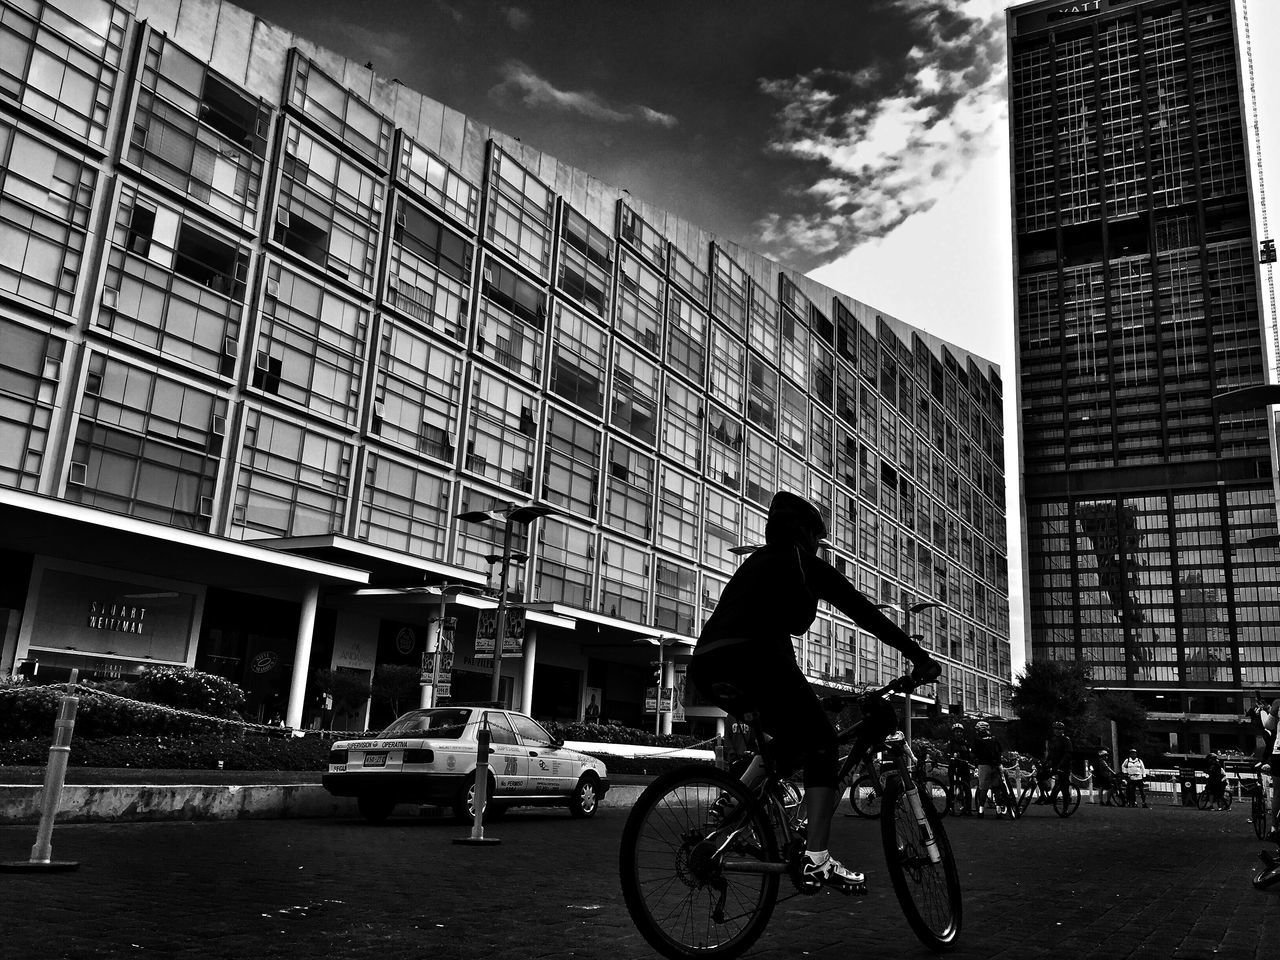 architecture, transportation, bicycle, built structure, building exterior, mode of transport, full length, city, men, on the move, land vehicle, riding, city life, leisure activity, cycling, sky, lifestyles, travel, office building, outdoors, cloud - sky, day, tall - high